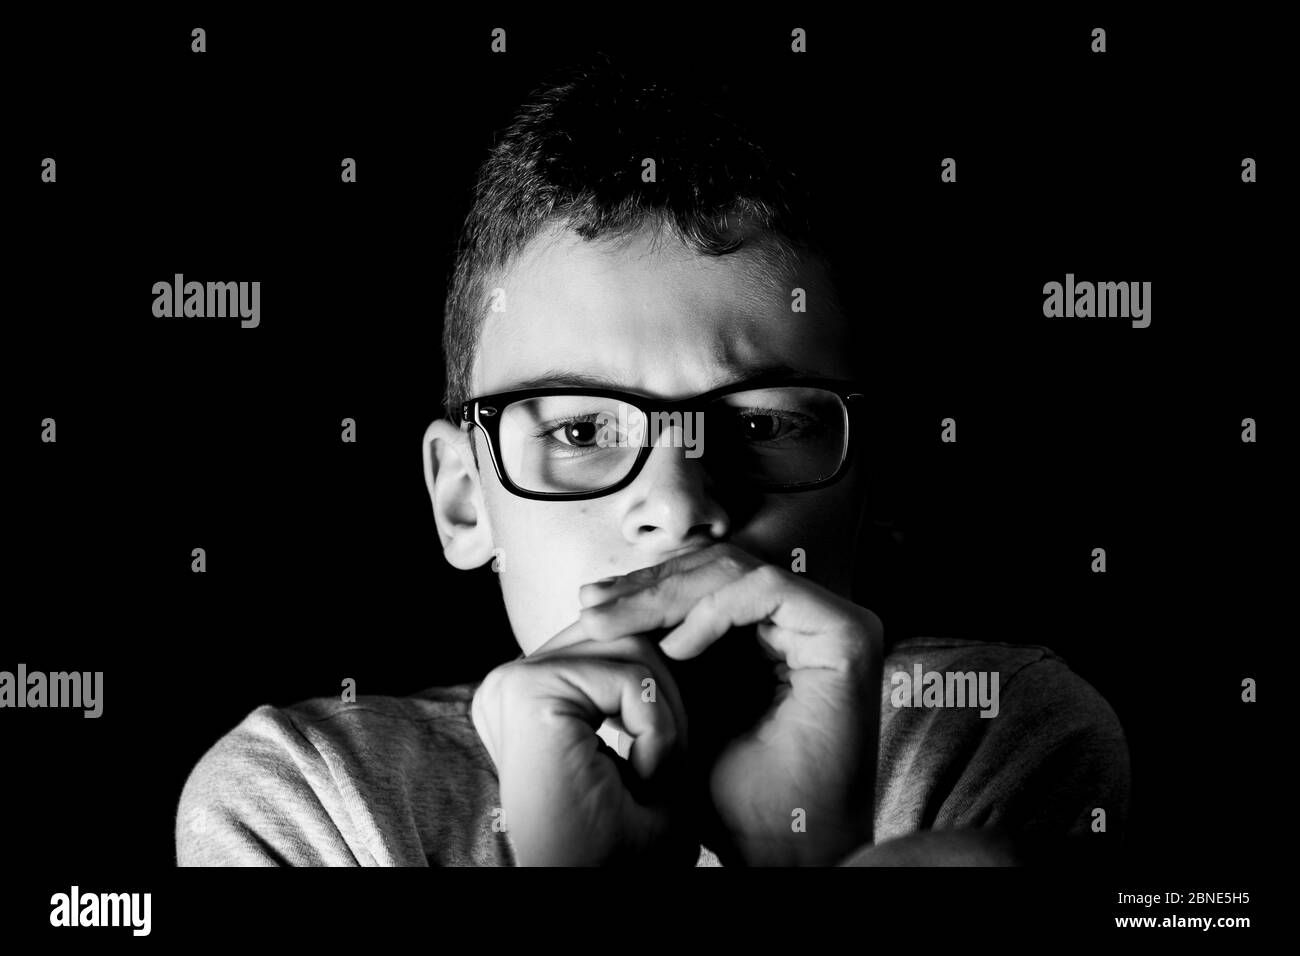 Boy with glasses looks lonely into the camera Stock Photo